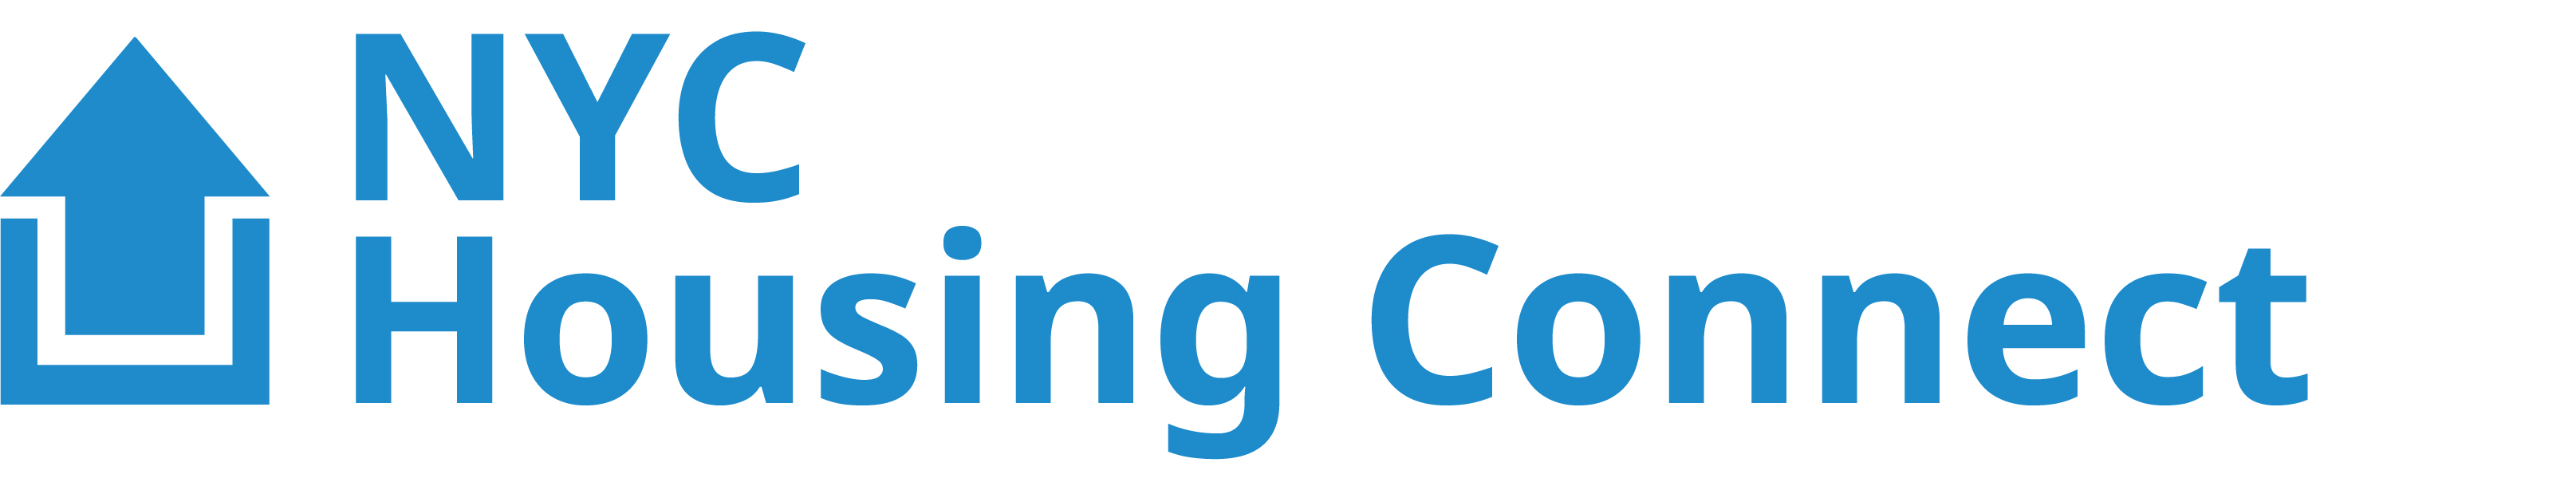 nyc housing connect logo